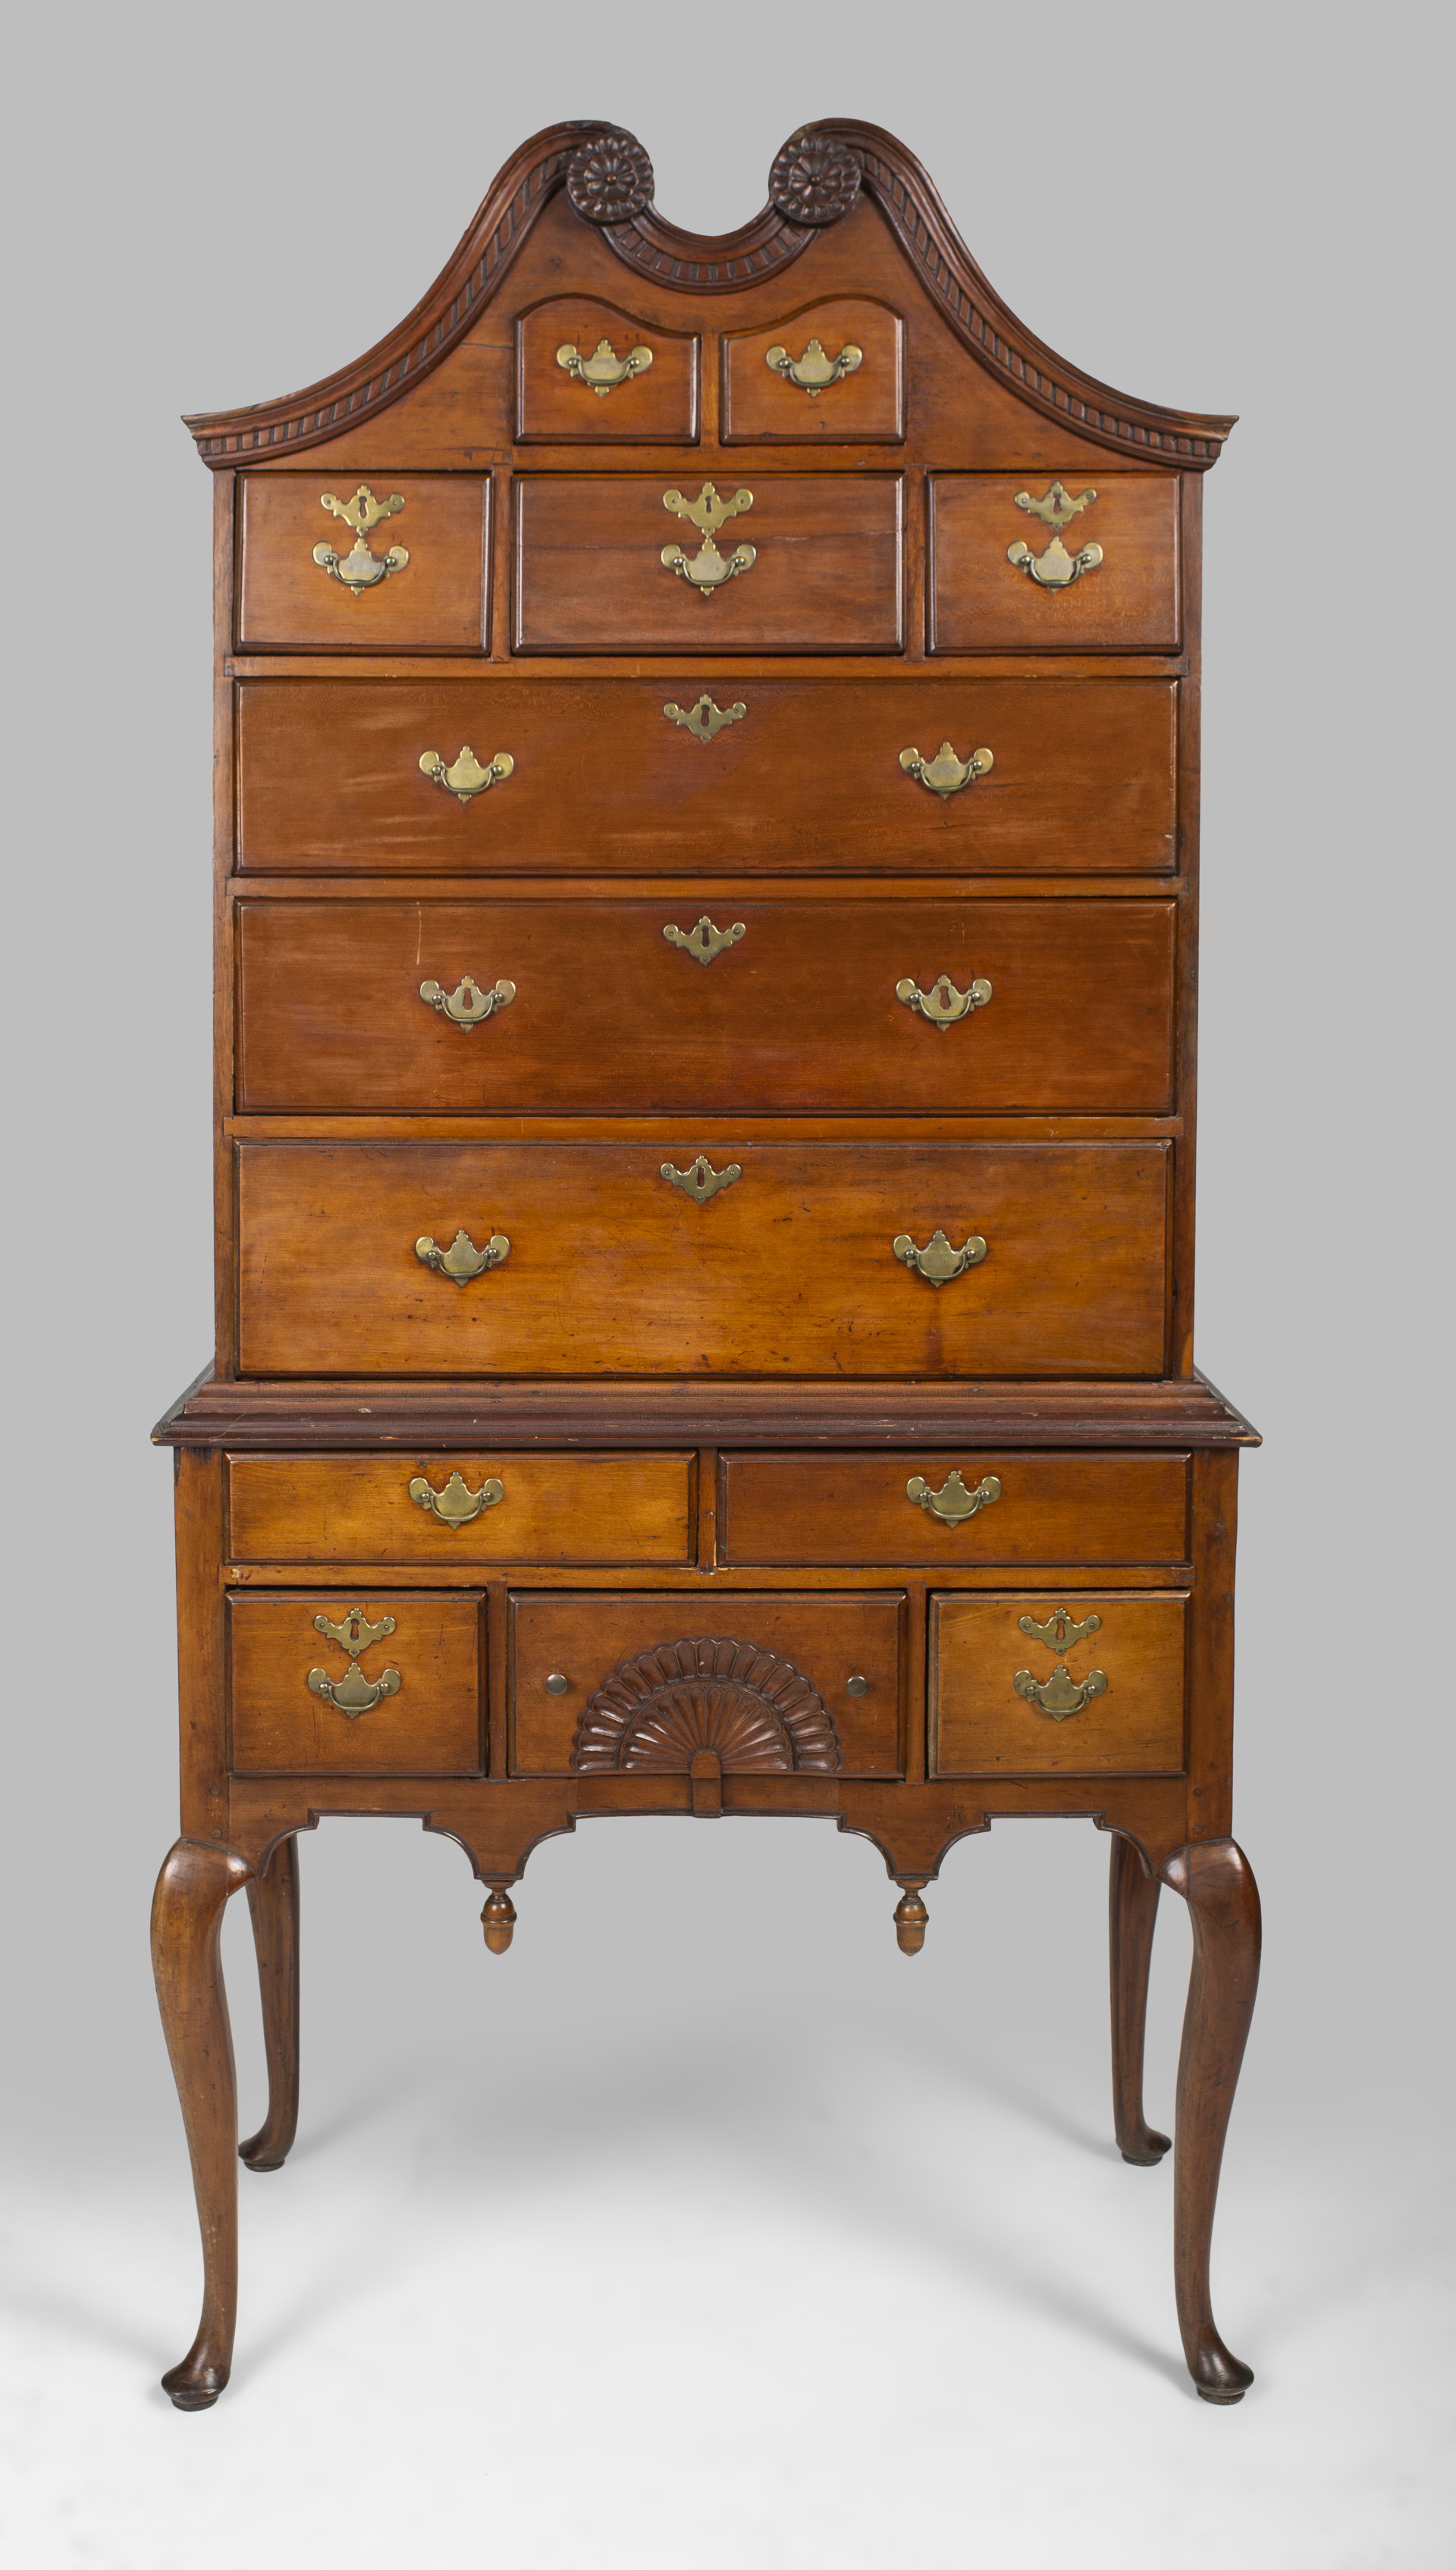 A fine country Queen Anne high chest